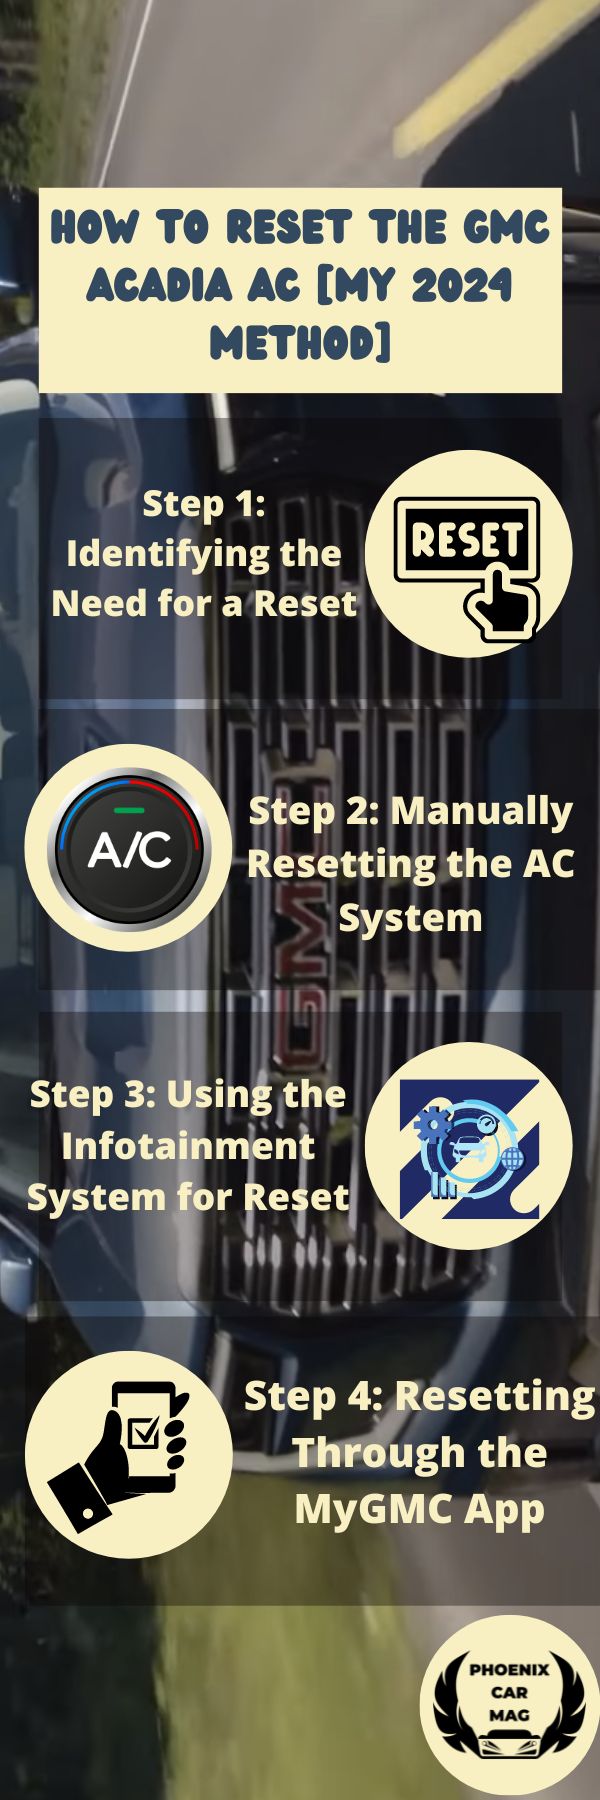 an infographic about How to Reset the GMC Acadia AC [My 2024 Method]